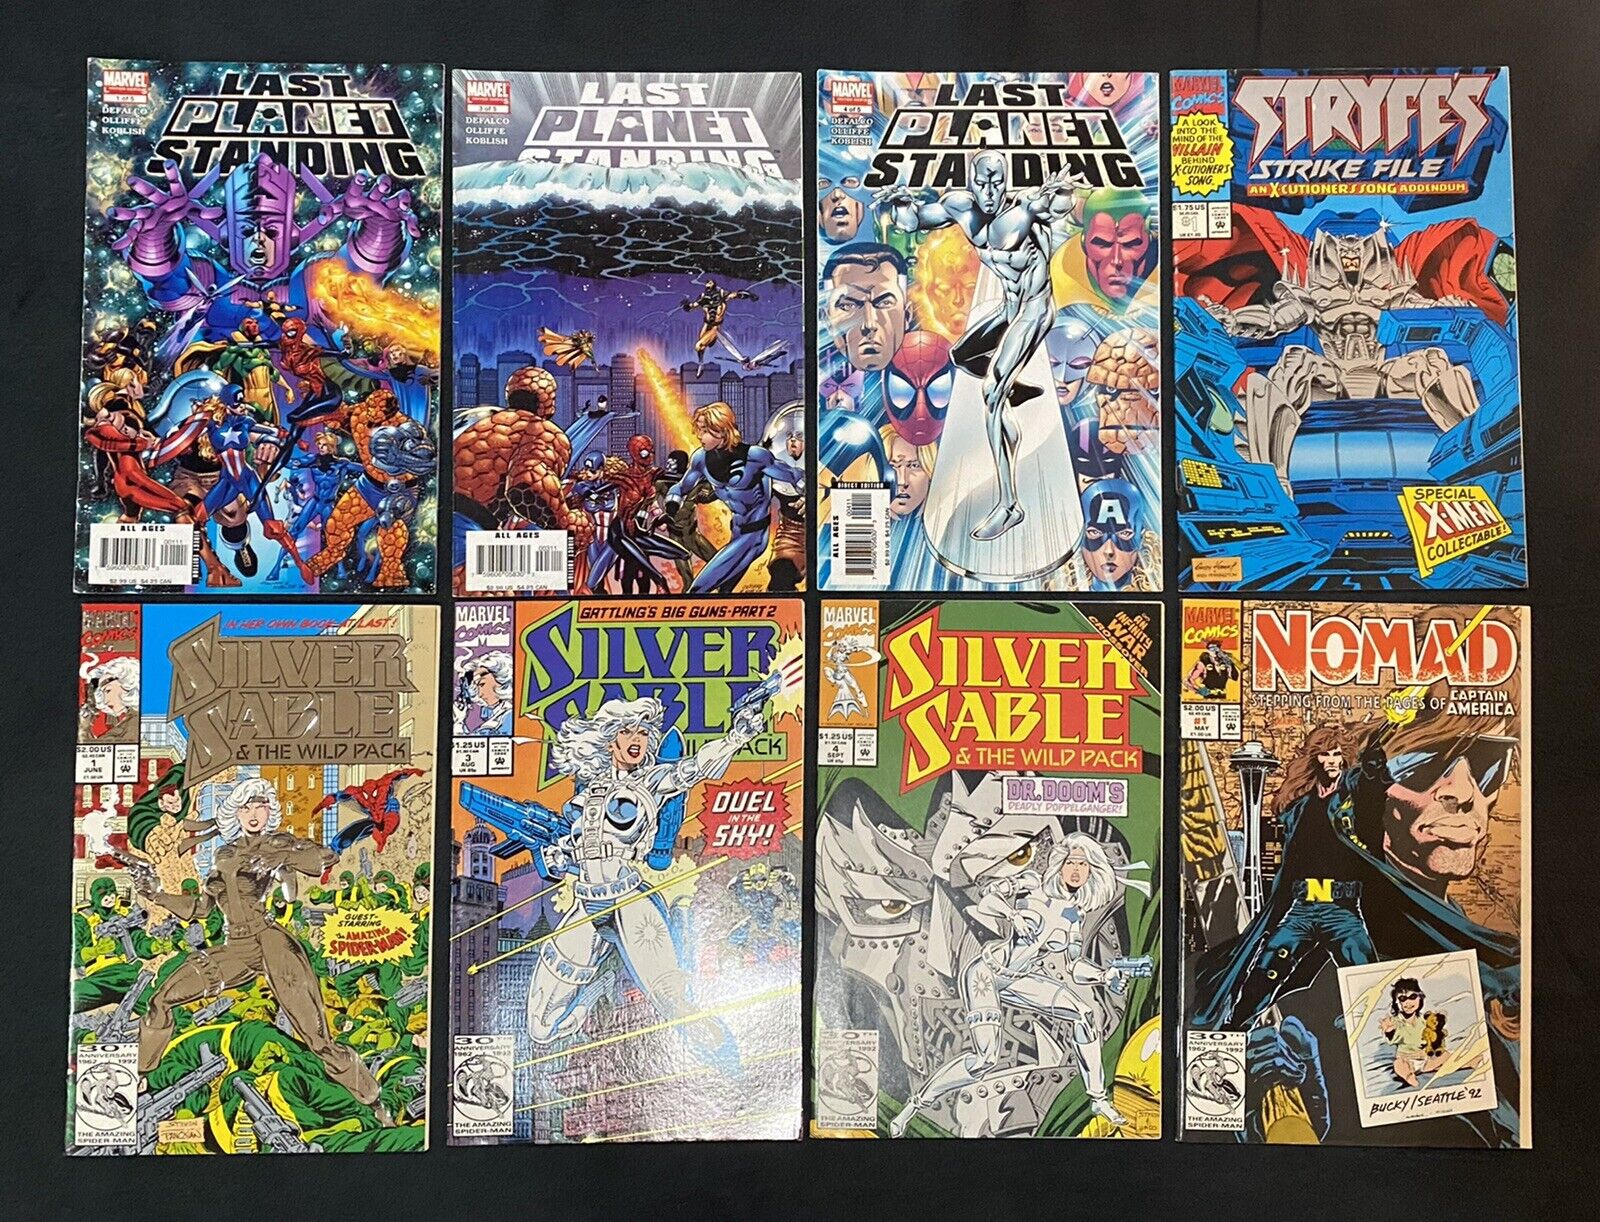 Assorted lot 8 Marvel Comics Nomad, Silver Sable, Stryfe, Last Planet Standing